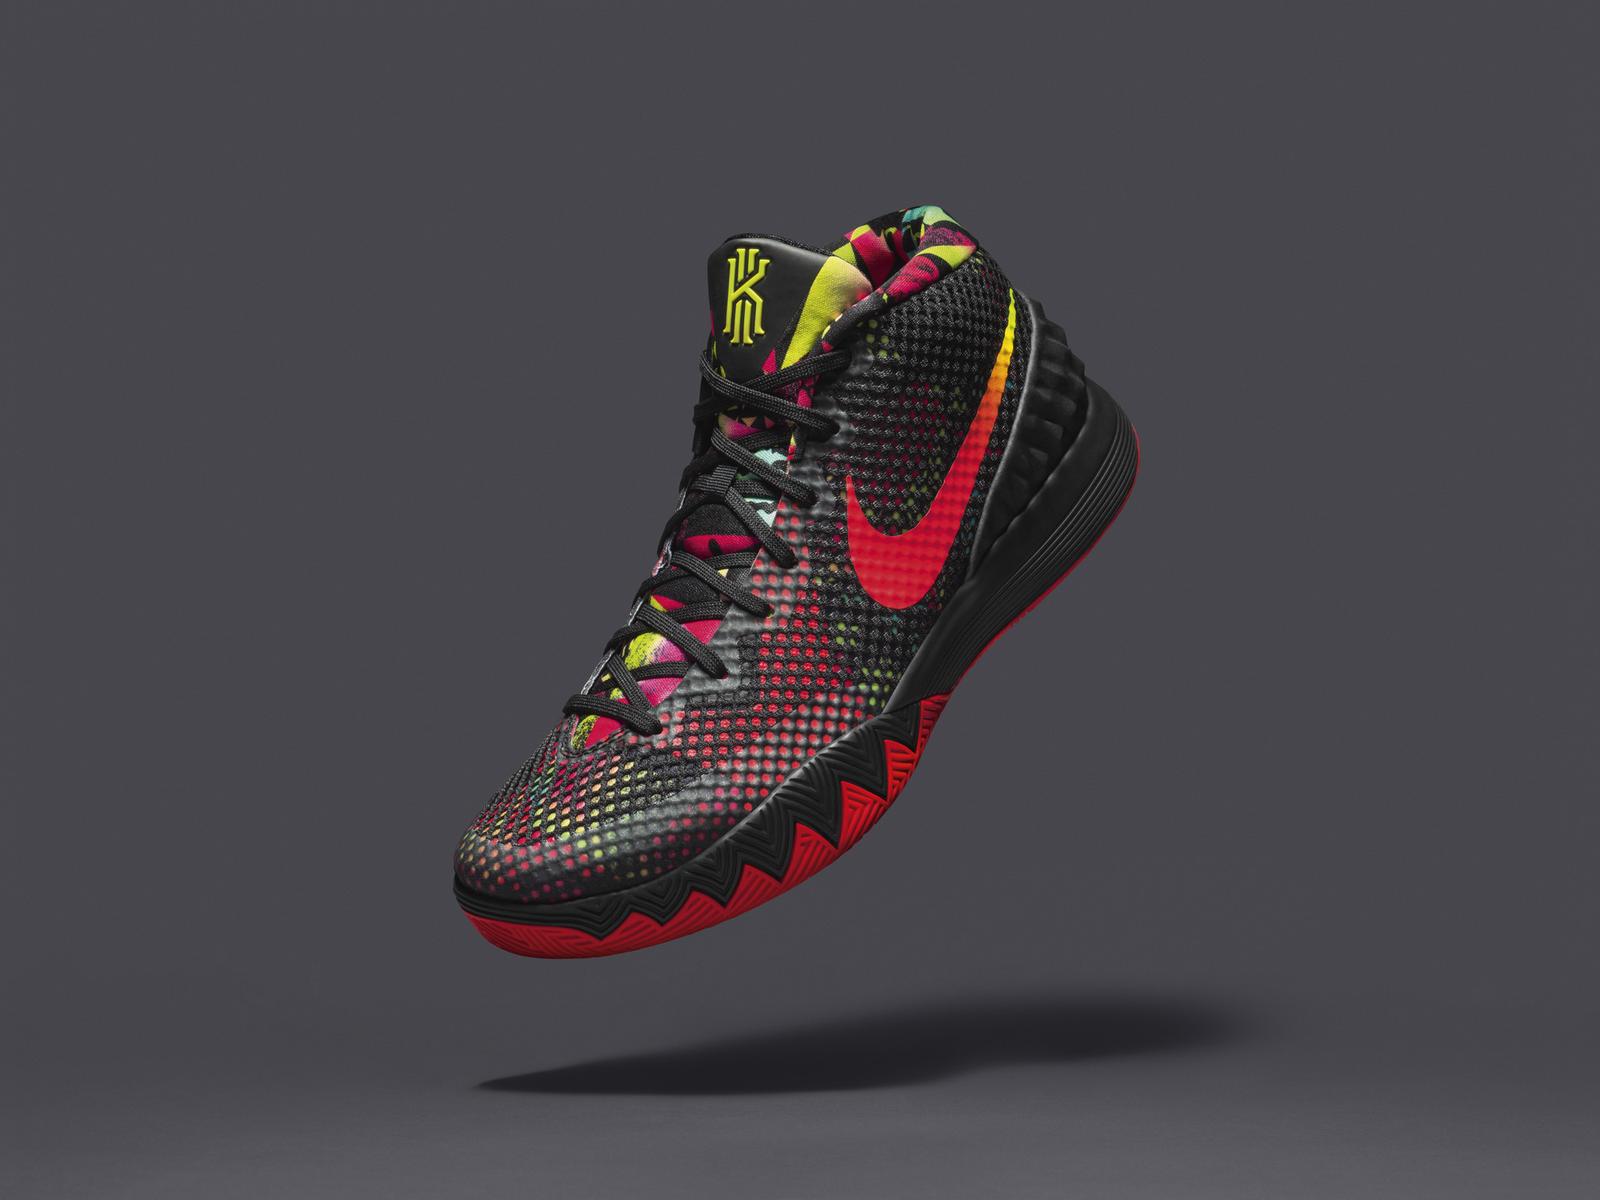 Find Out When You Can Get Your Hands On The Nike Kyrie 1